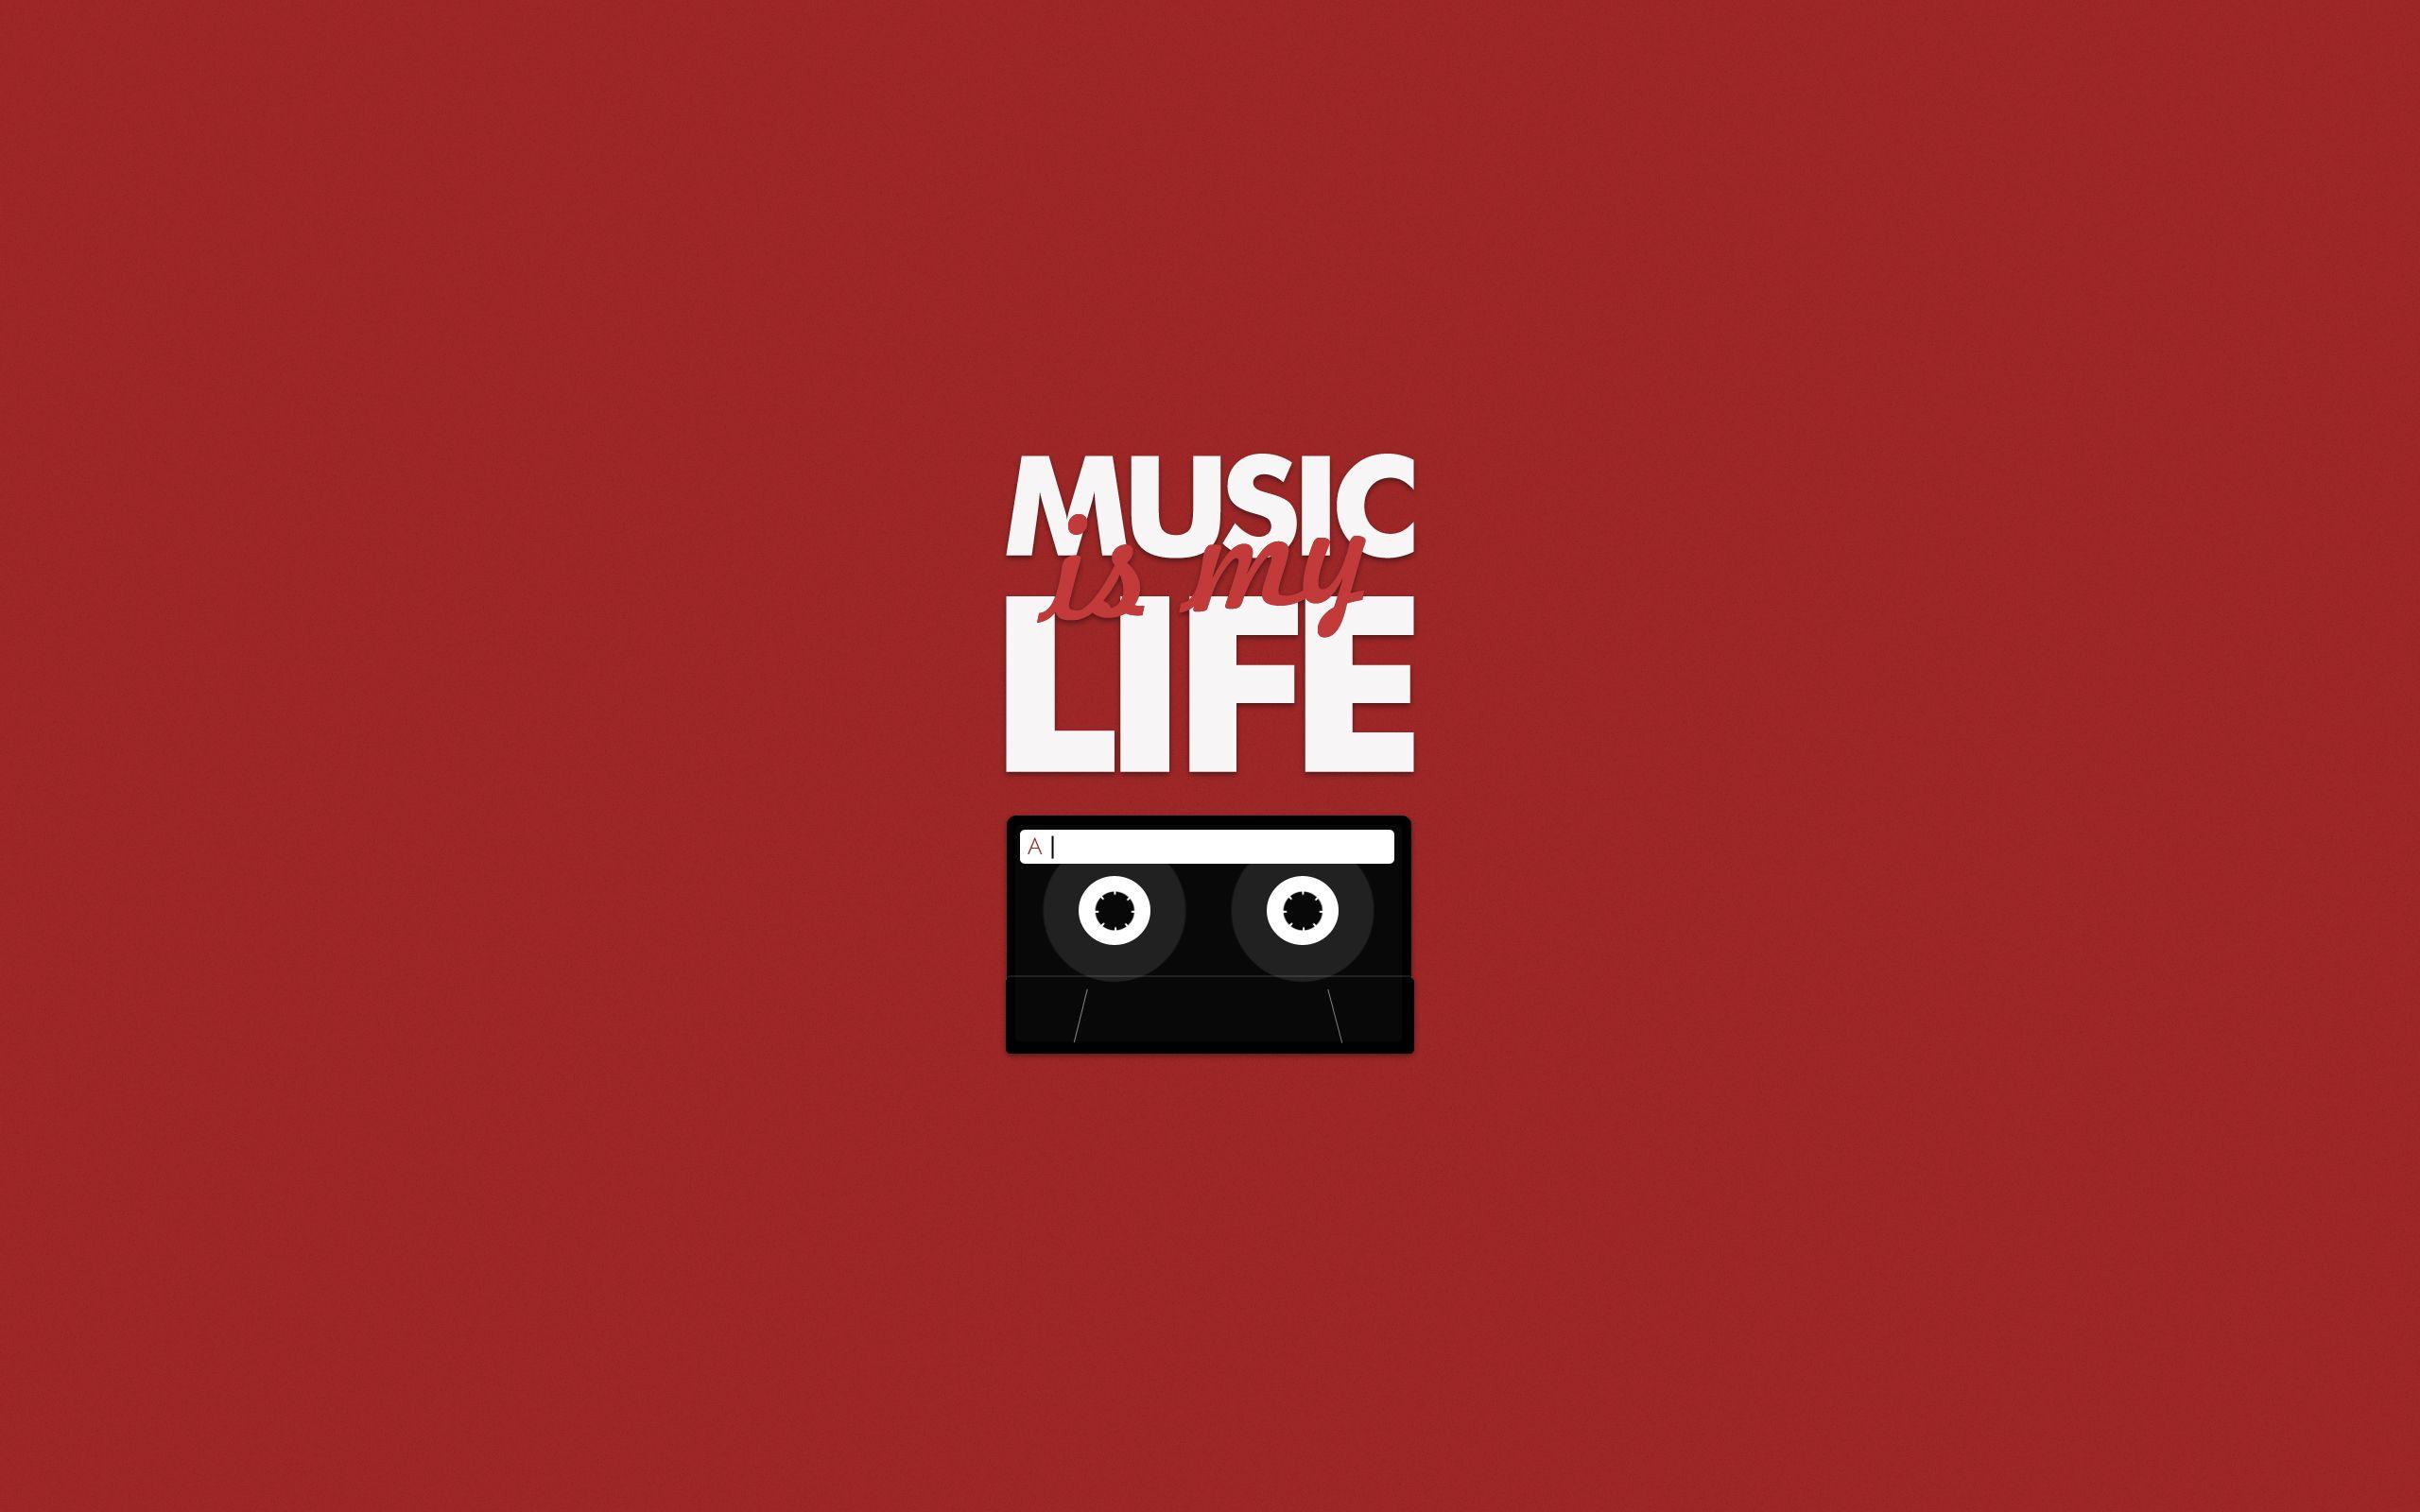 Music Is My Life Wallpaper